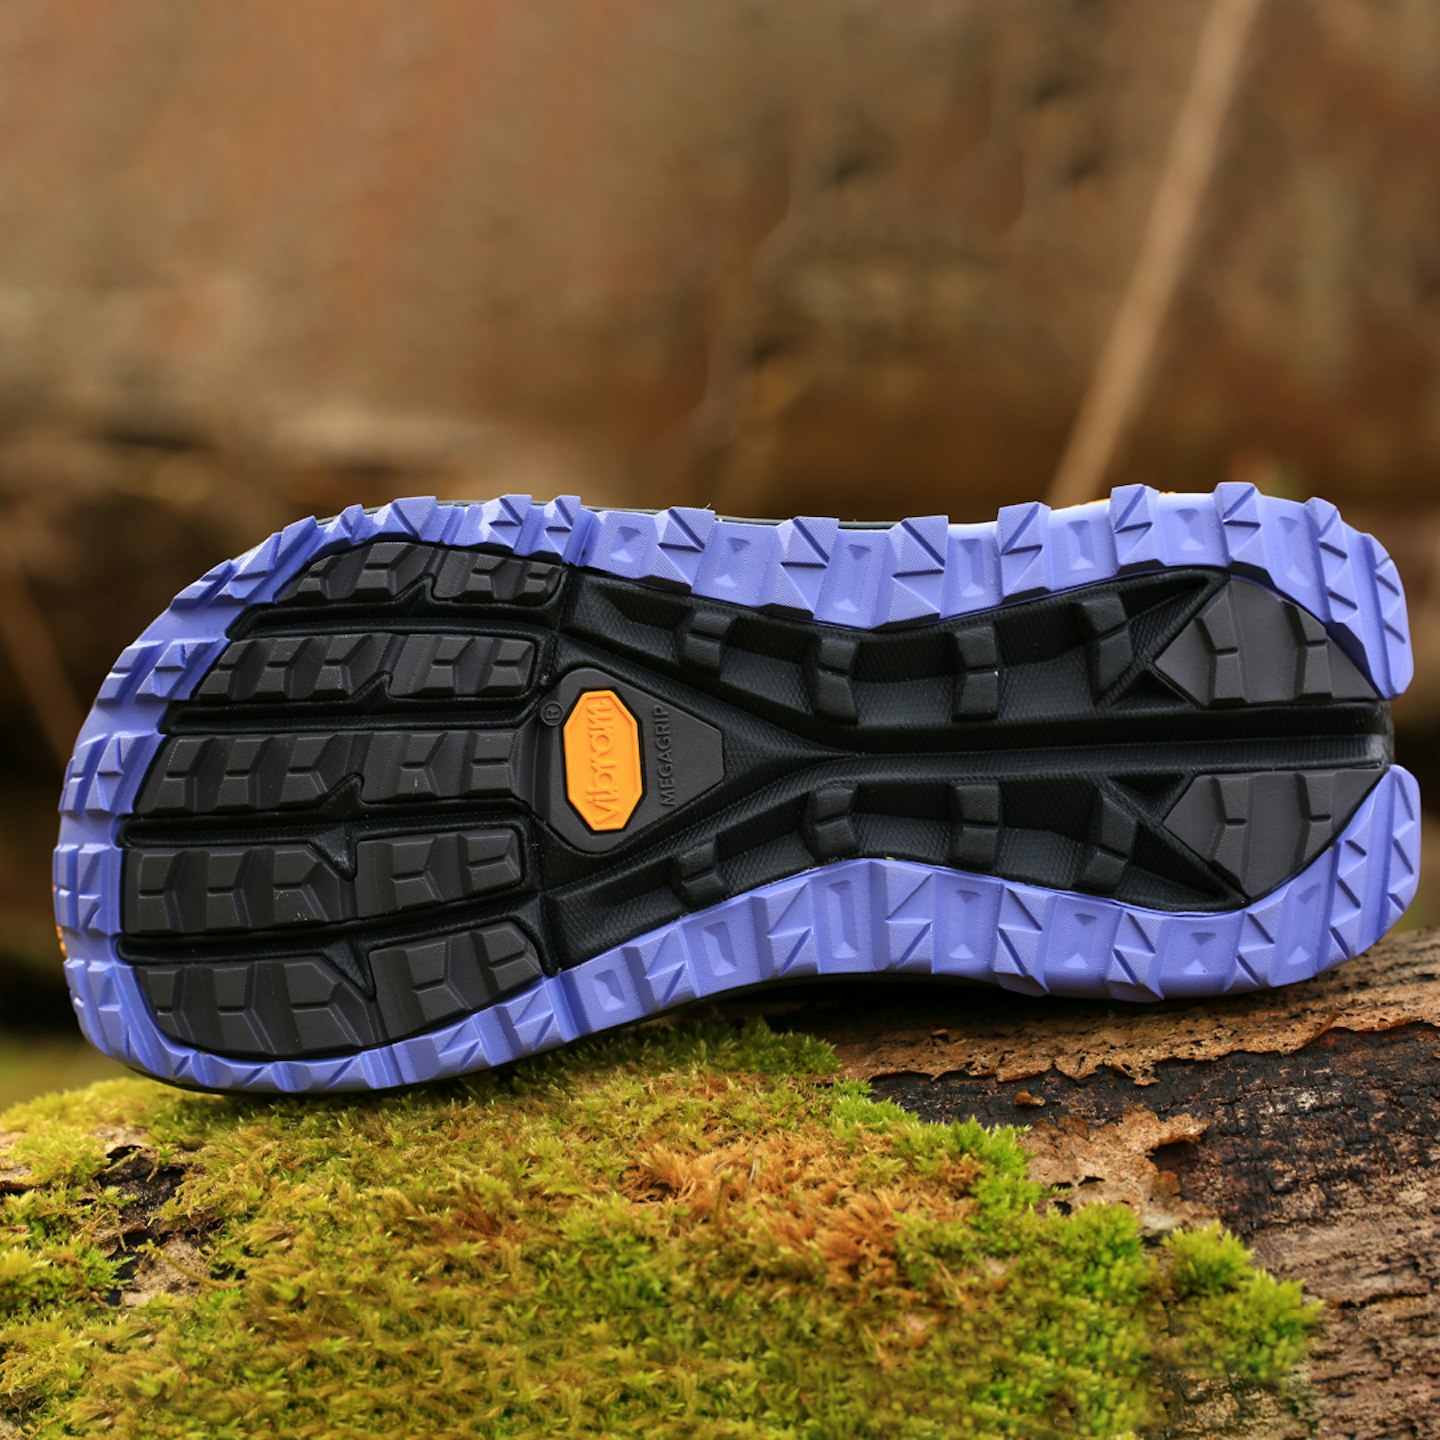 The sole of the altra olympus 5 trail running shoe